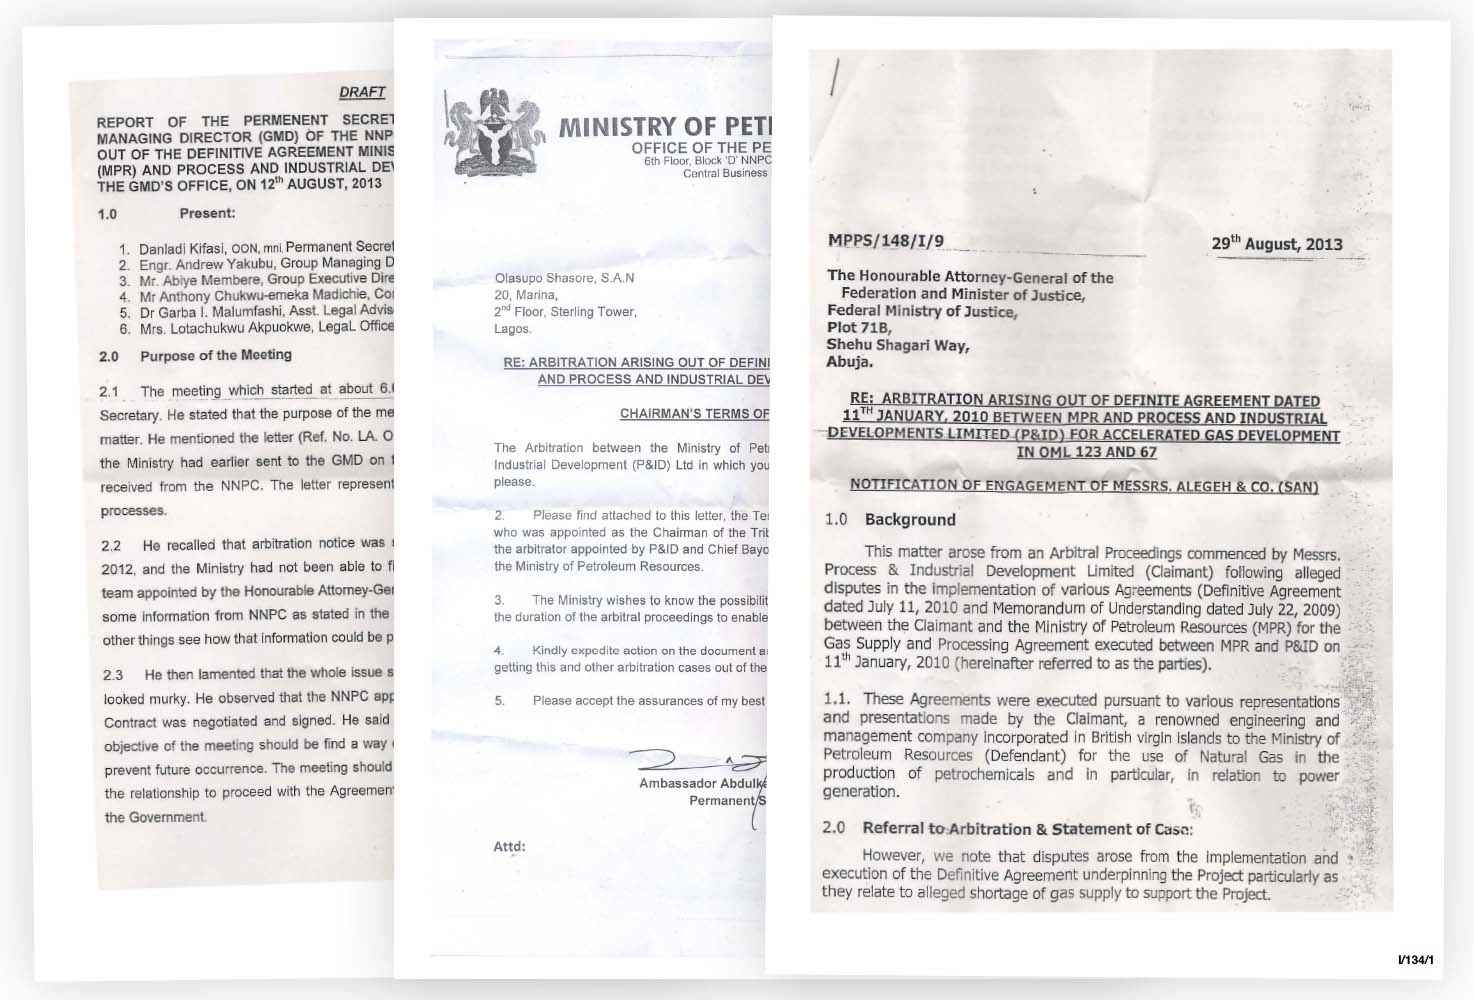 Pages from some of the sensitive internal government documents